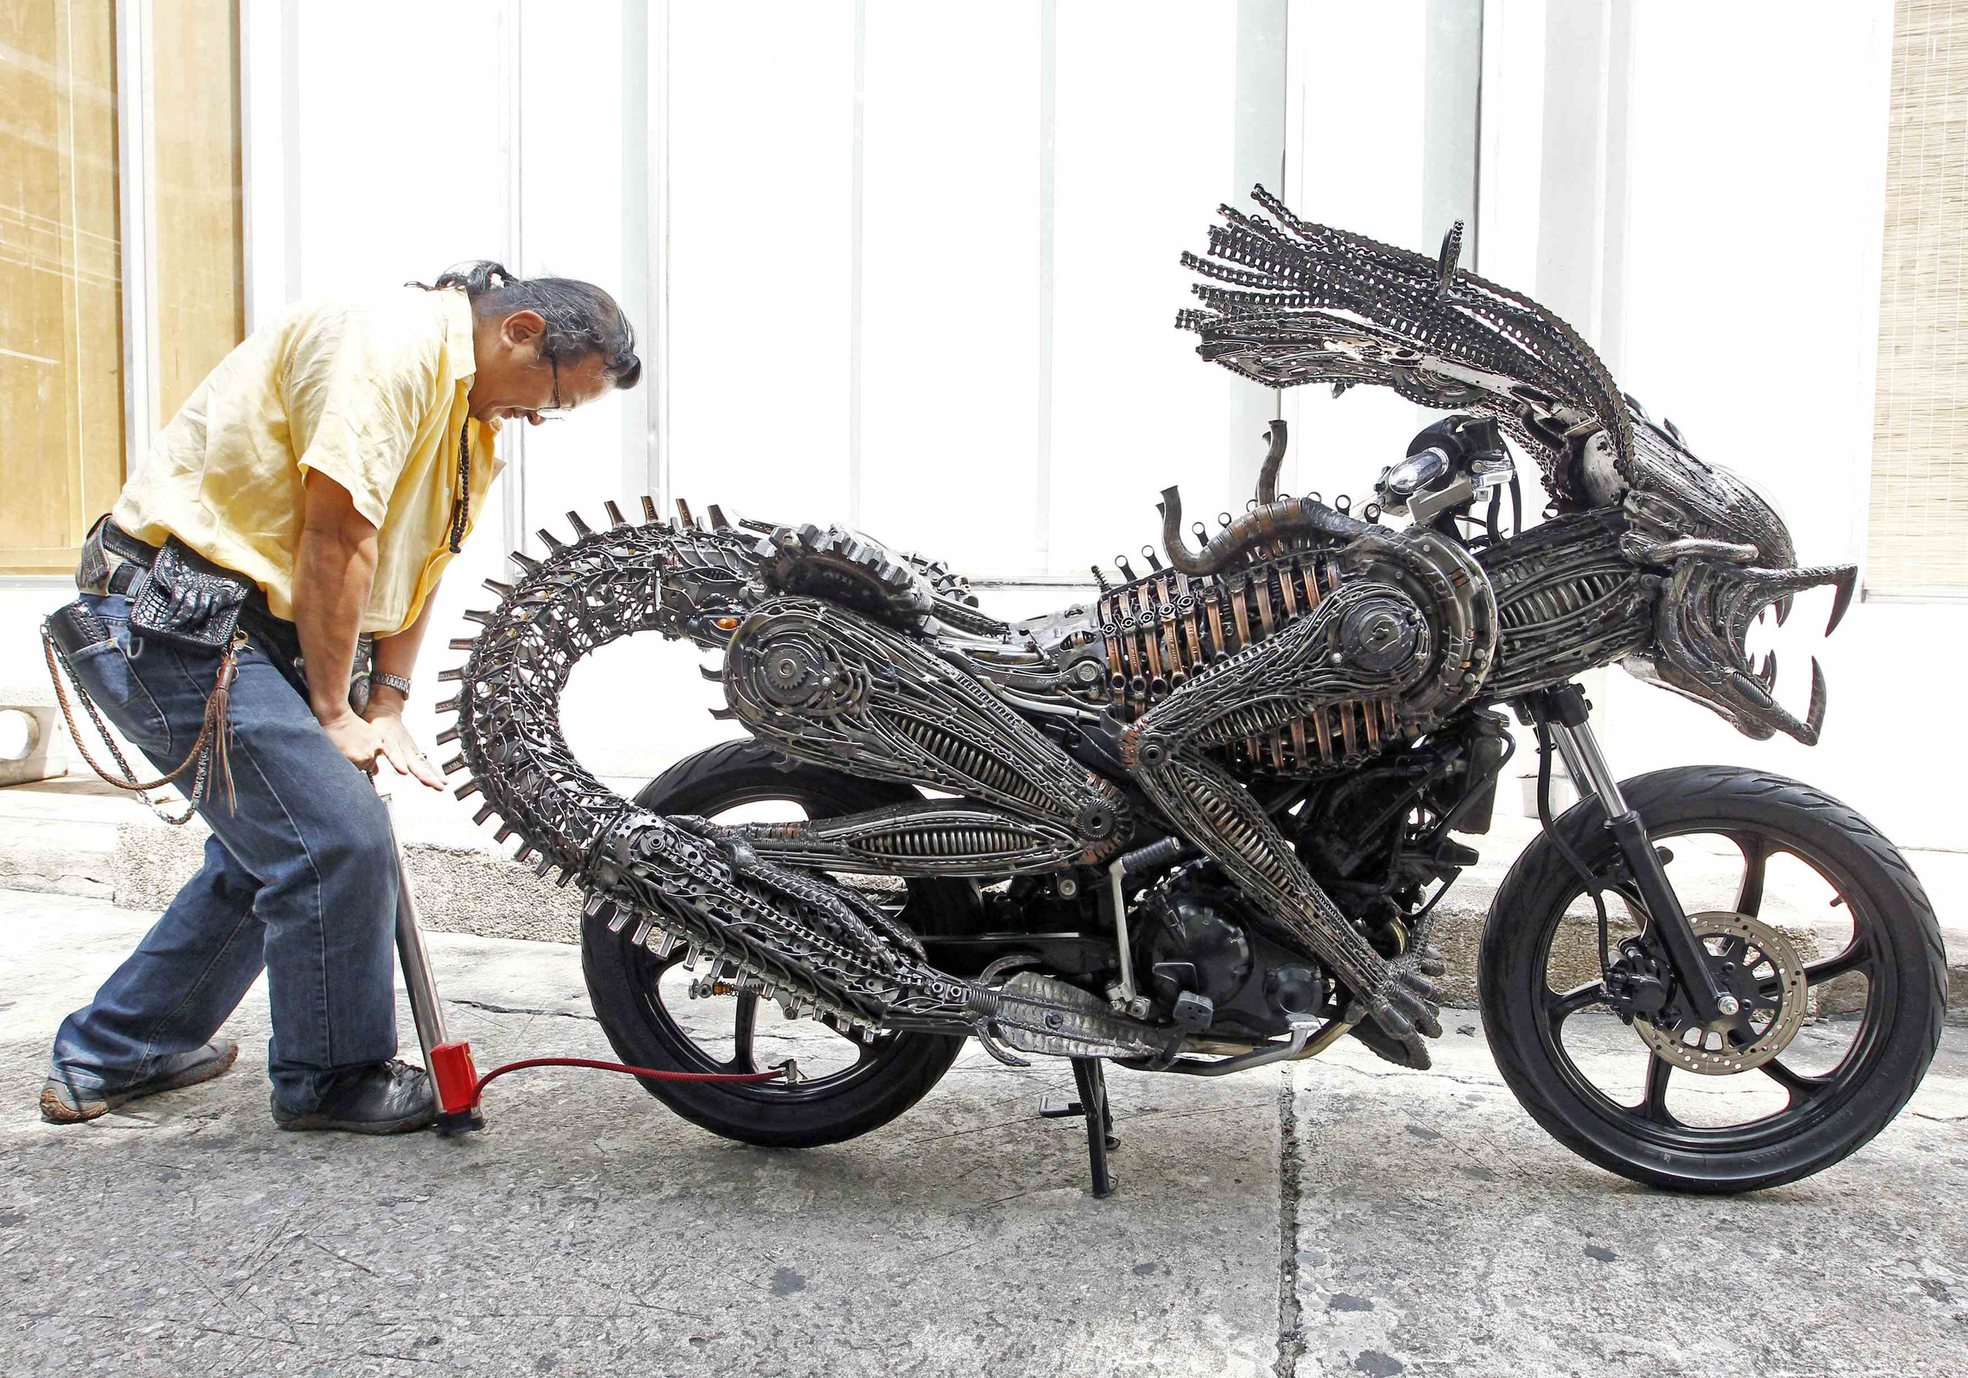 Roongrojna Sangwongprisarn's Predator Bike made from recycled parts